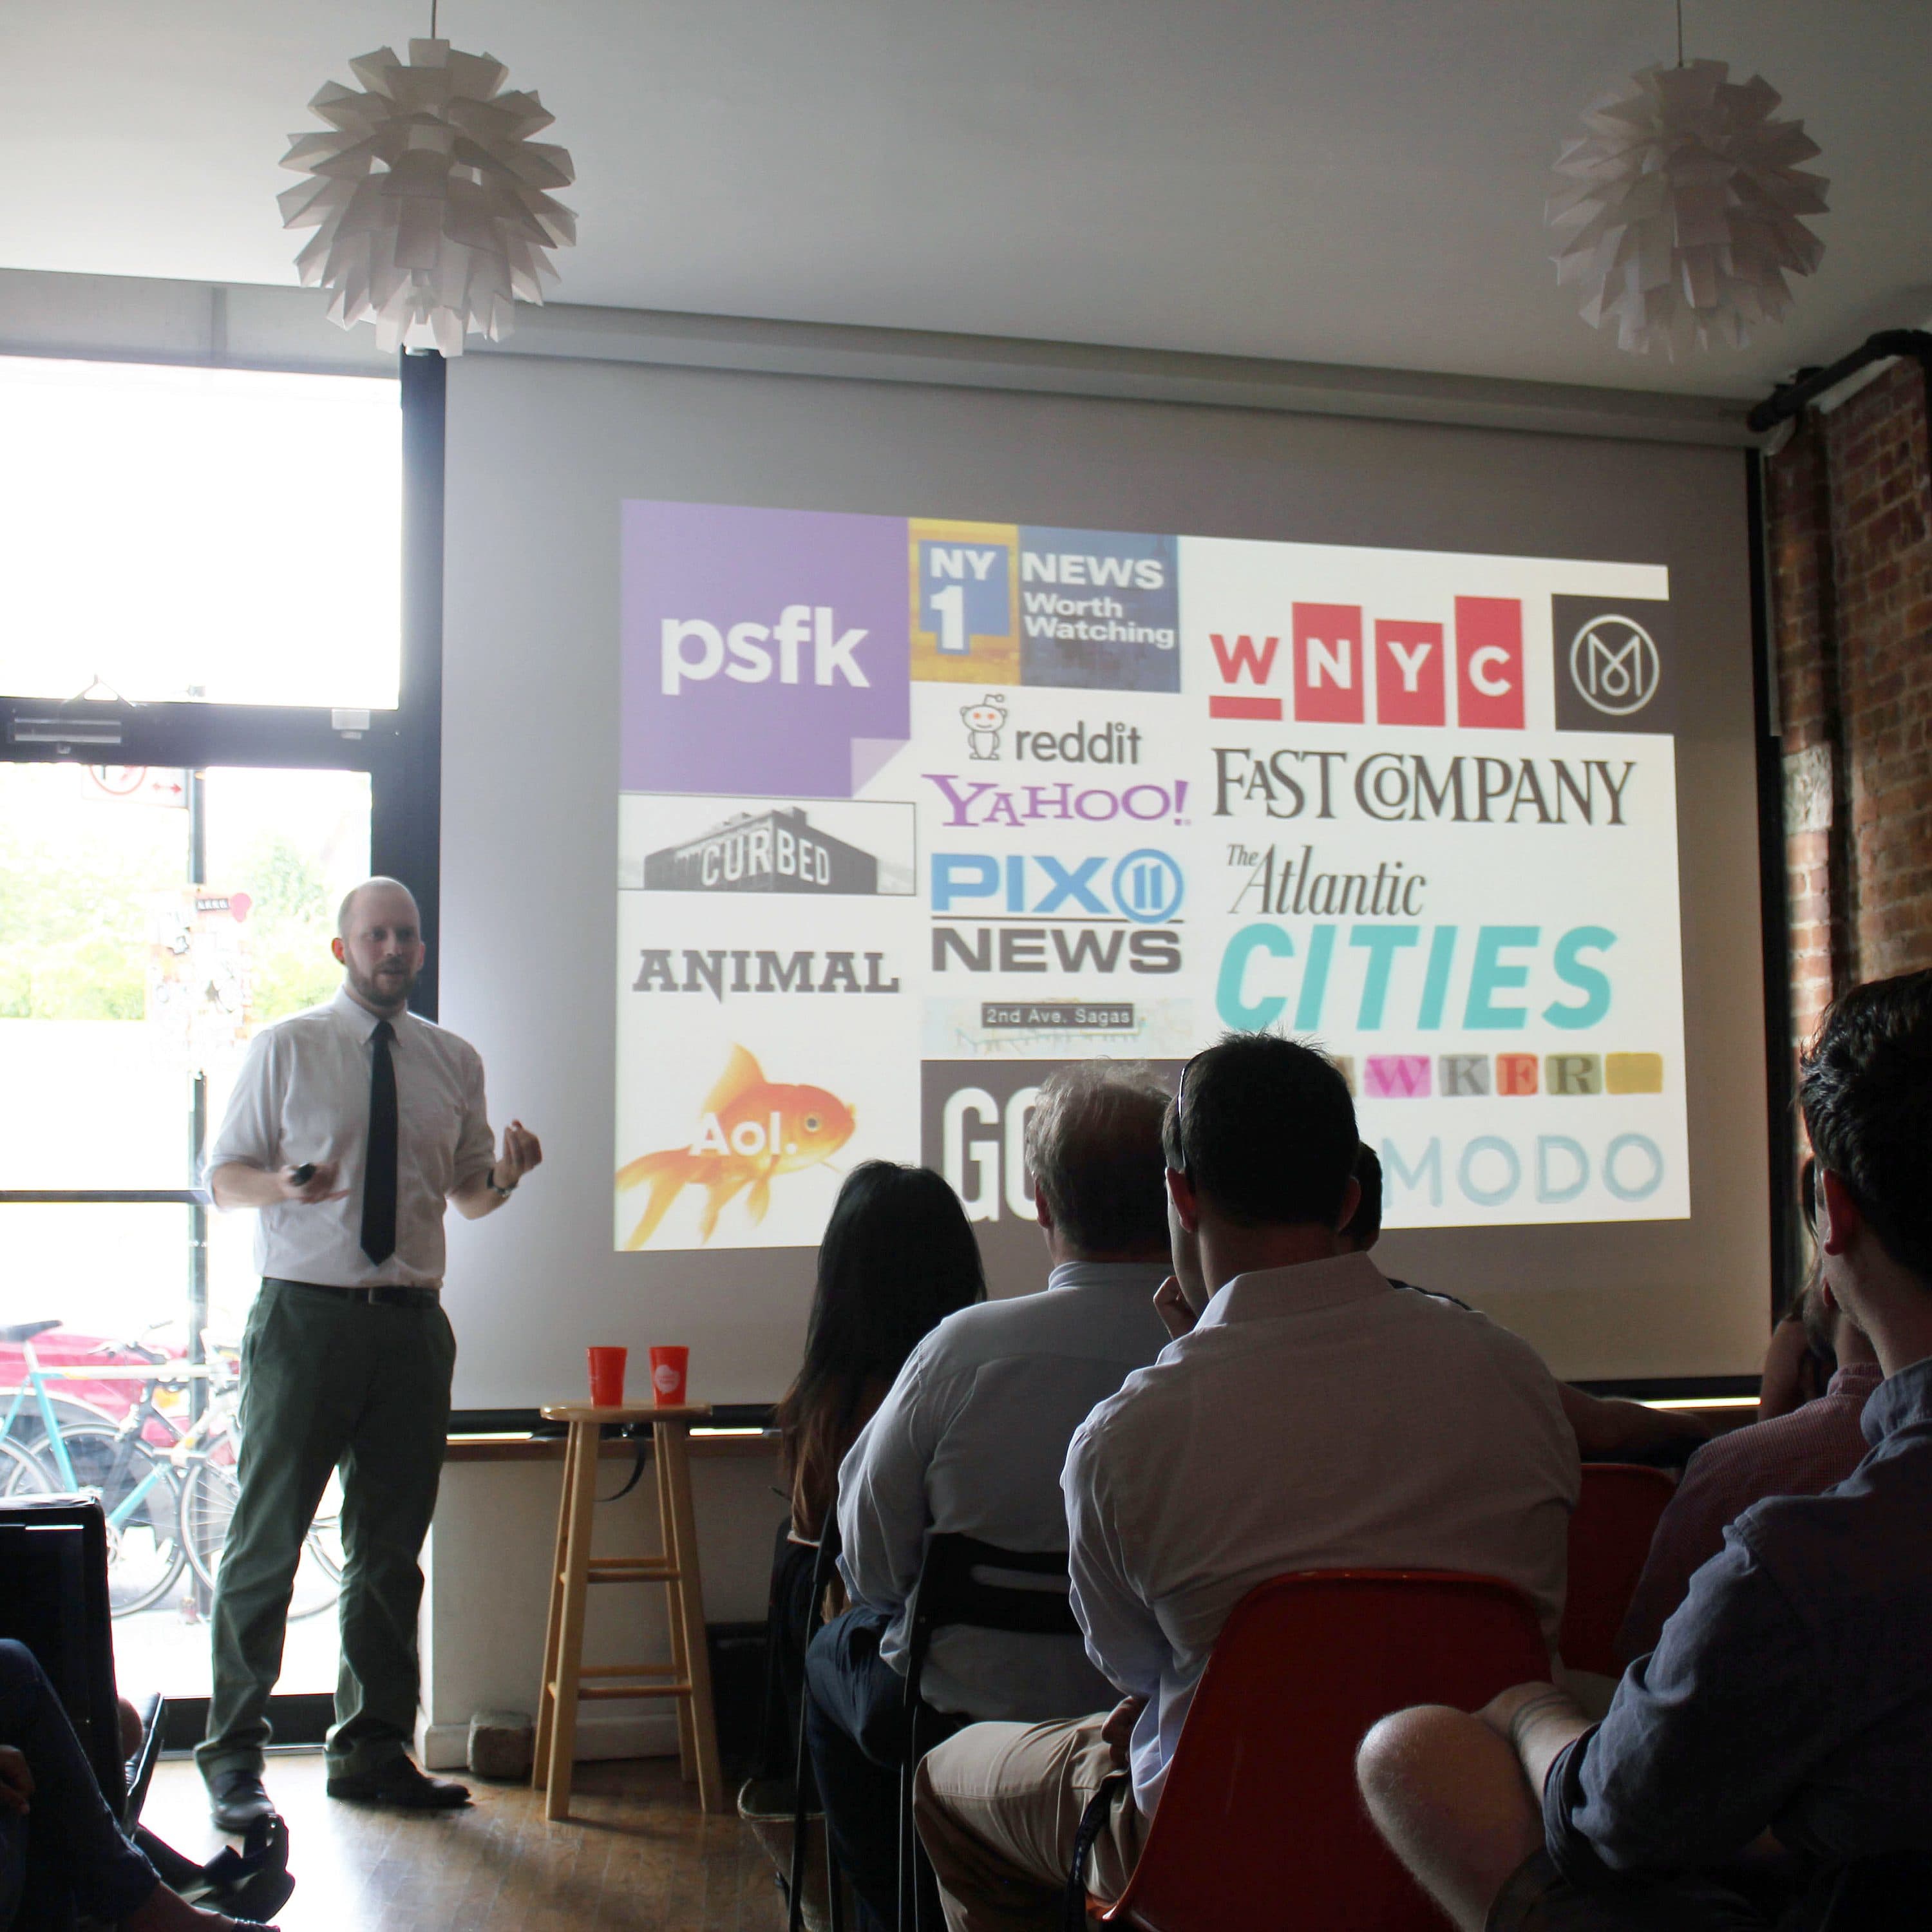 A man stands at the front of a room giving a presentation to a seated audience. A projector screen behind him displays various media logos such as Fast Company, Atlantic Cities, and Yahoo!. The room has a modern design with brick walls and flower-shaped hanging lights.